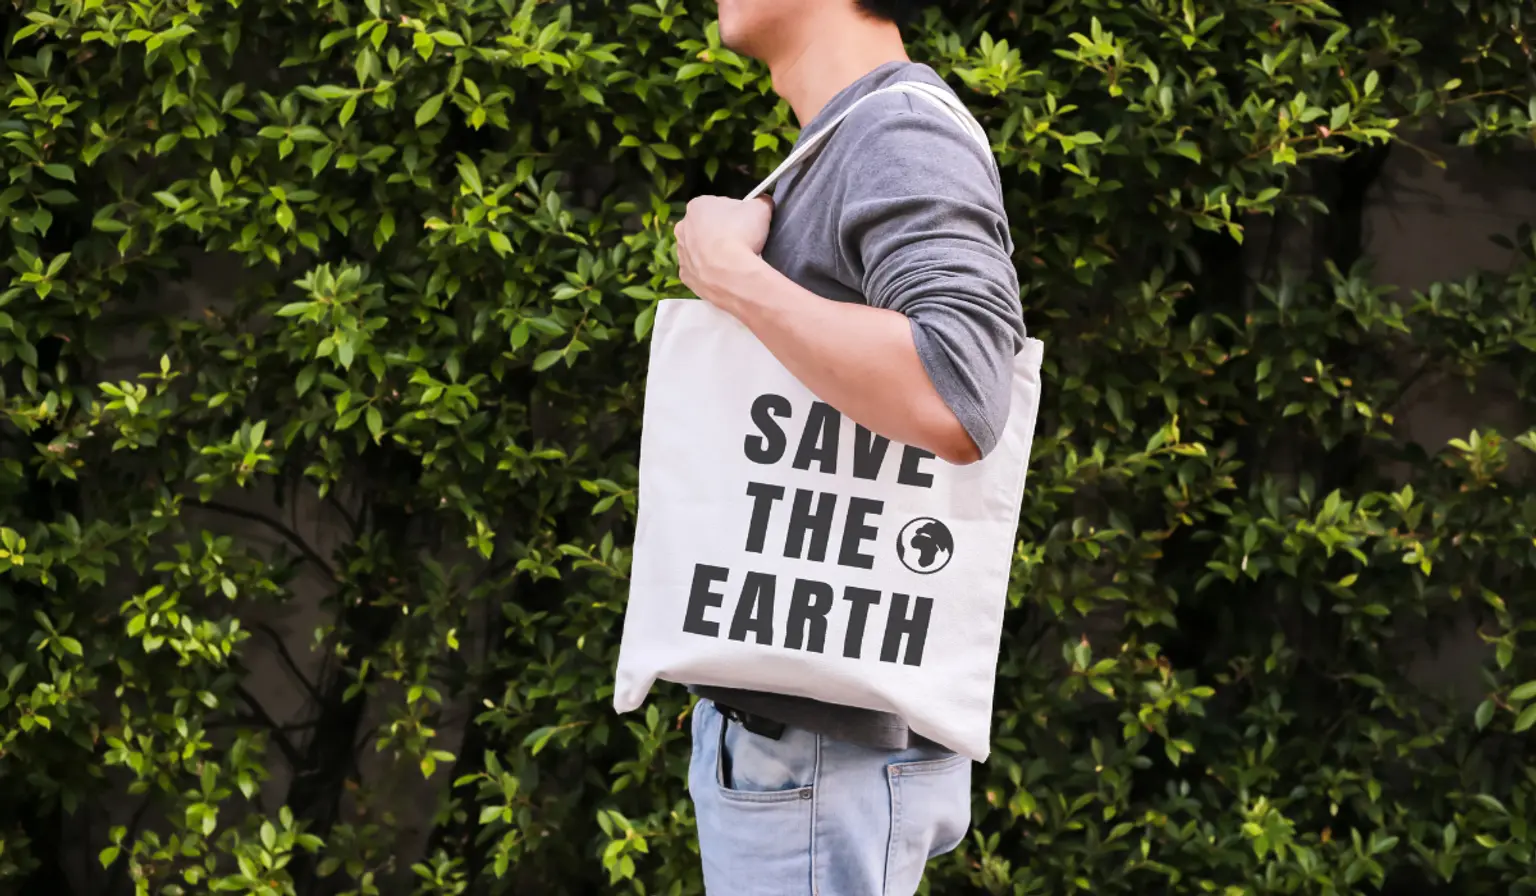 More shoppers than ever before are making the conscientious decision to choose products that are kinder to the environment. This is great news for the planet, and for creating a sustainable future for everyone.